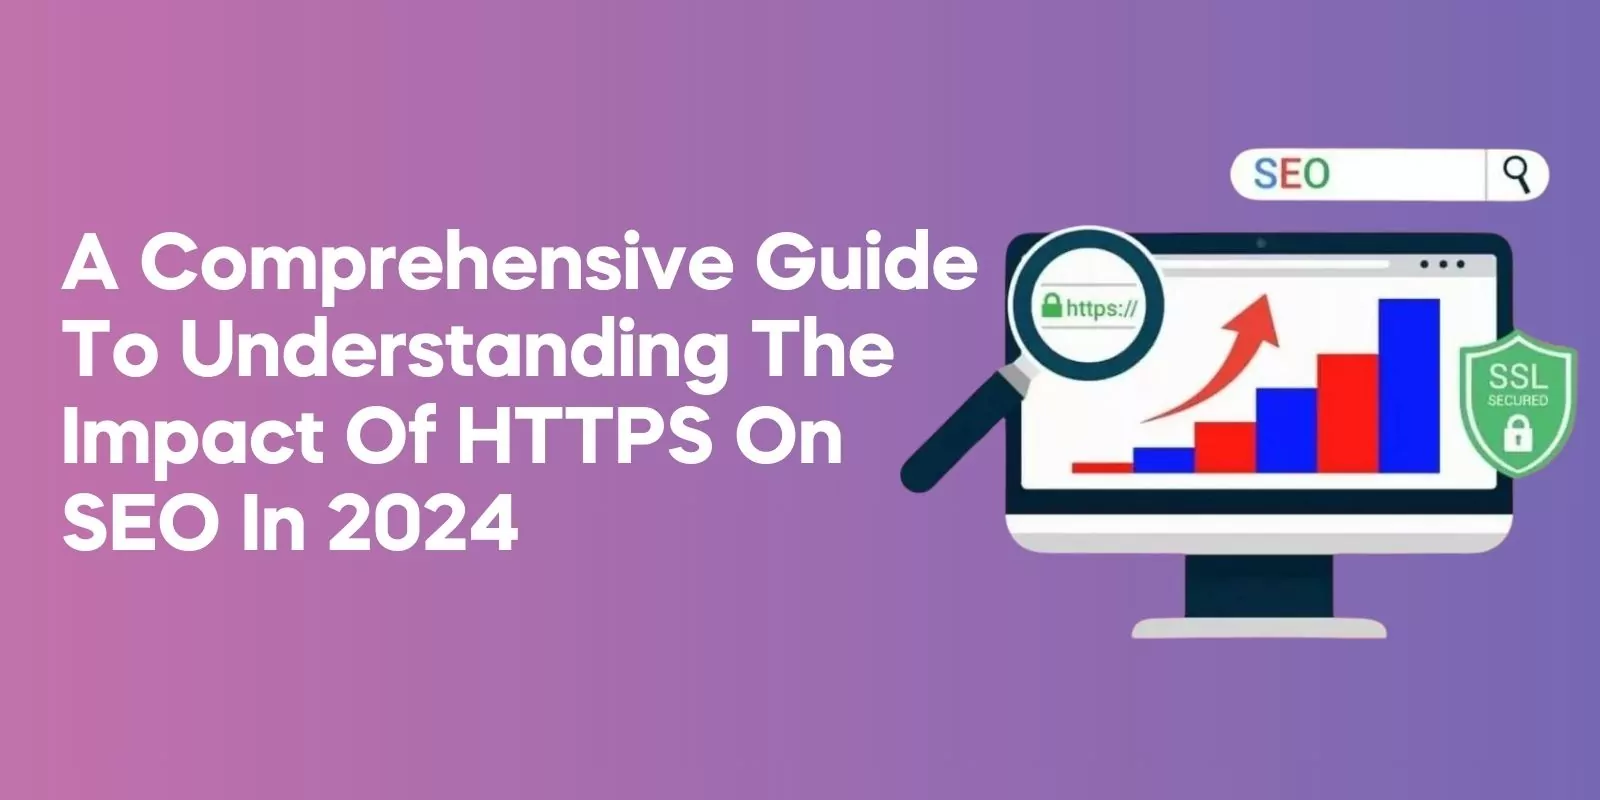 A Comprehensive Guide to Understanding the Impact of HTTPS on SEO in 2024